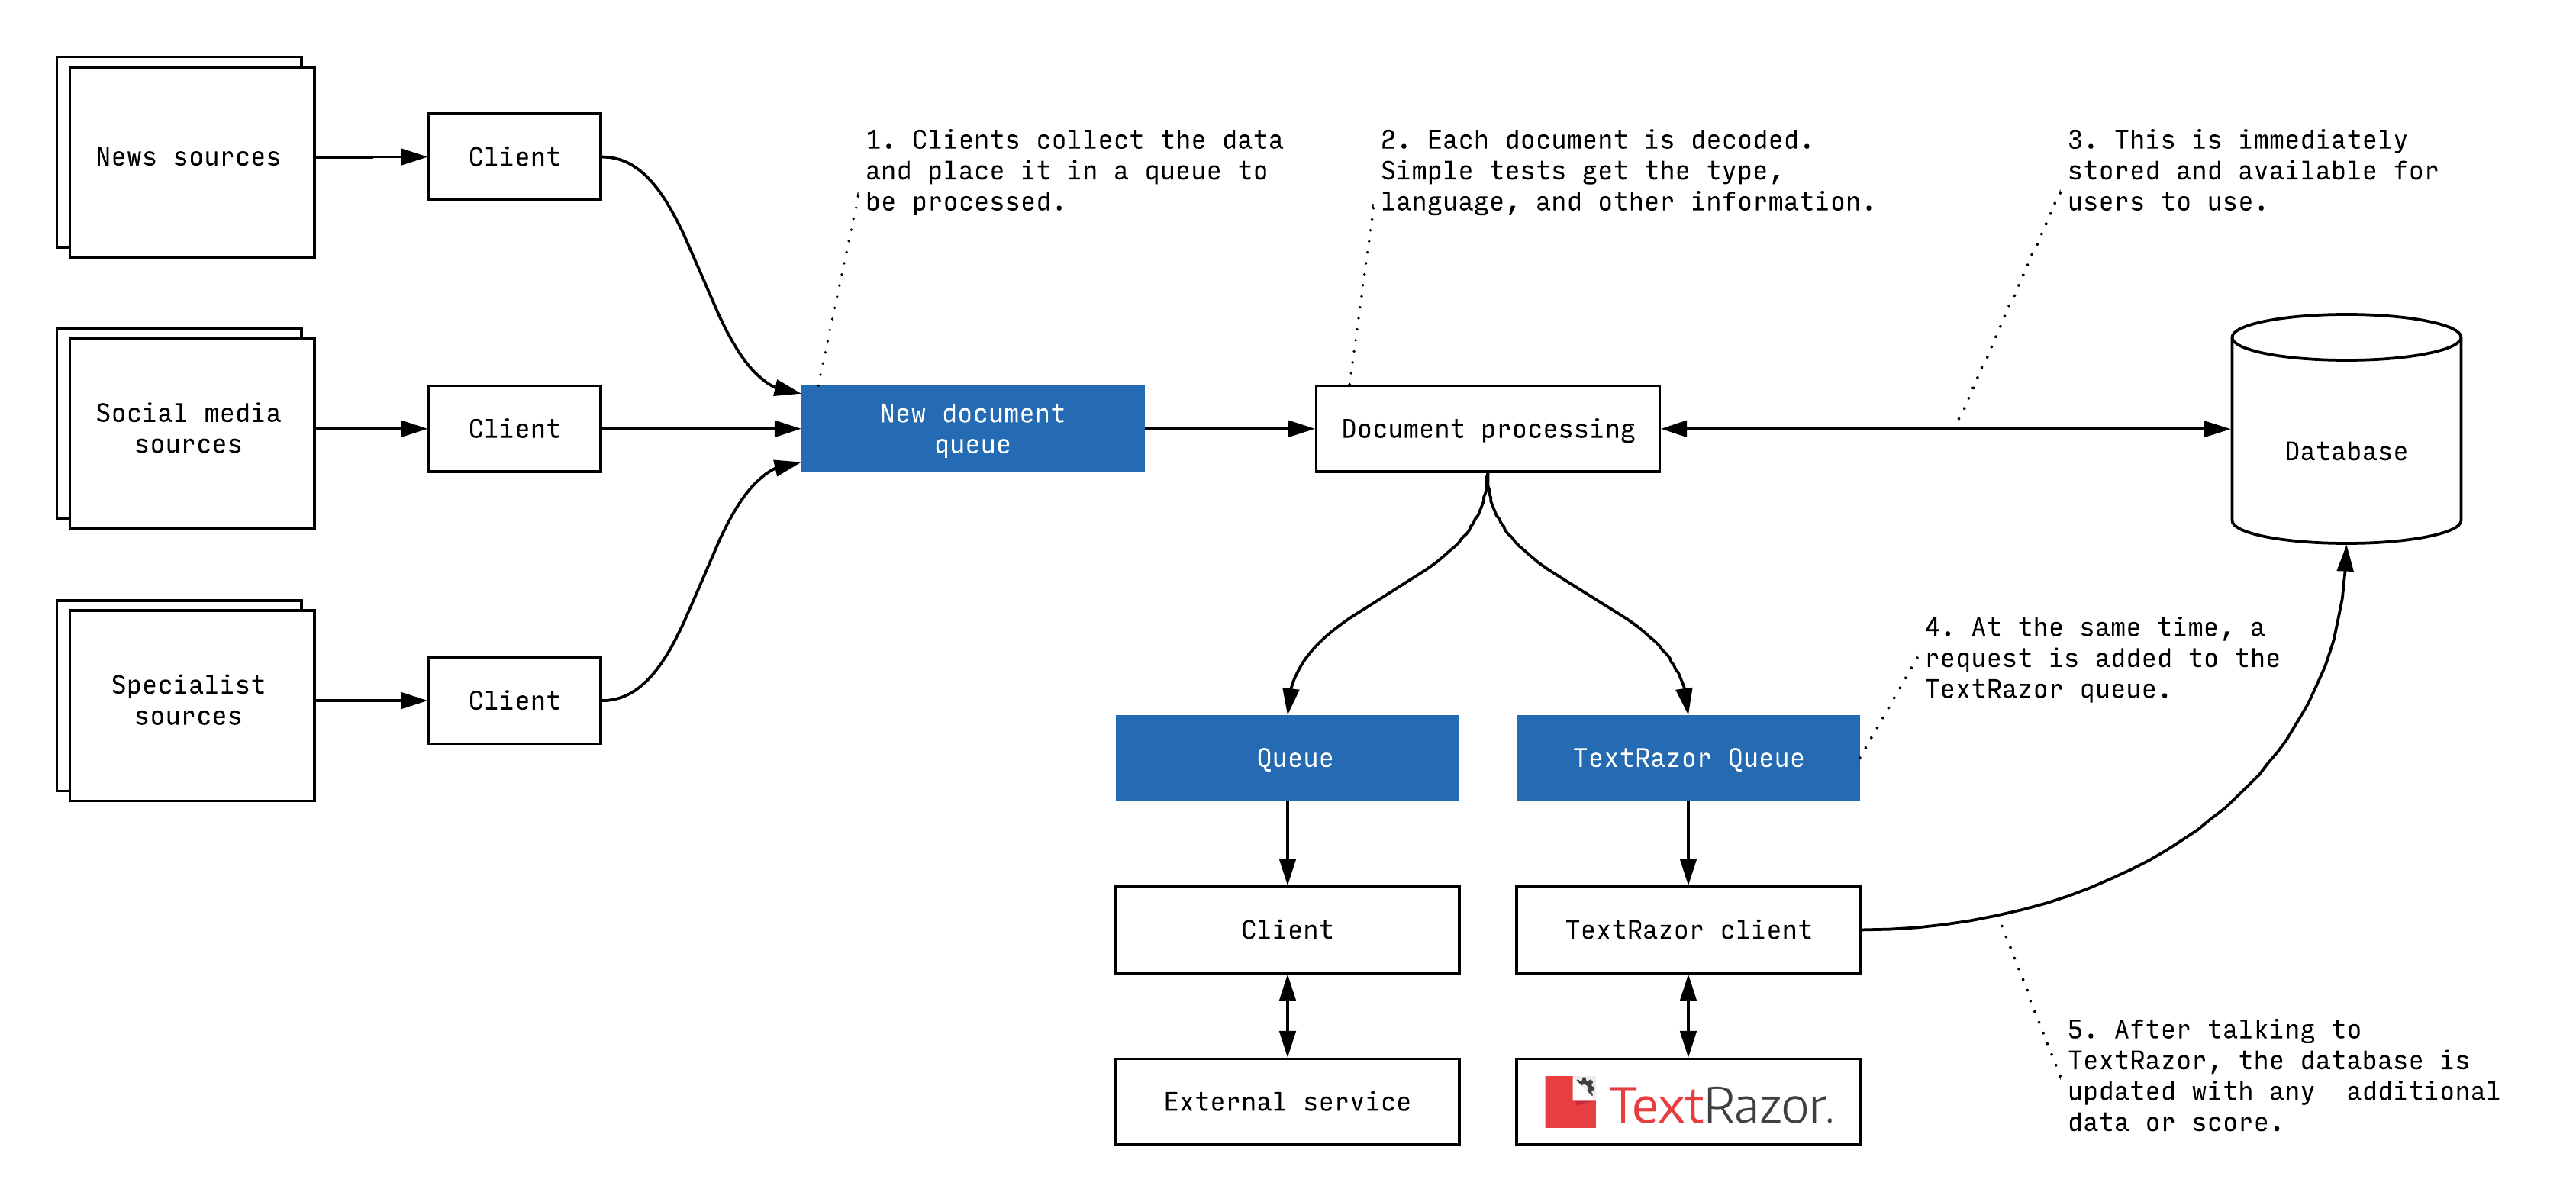 A diagram showing the steps in the record data processing and where NLP processing sits within that